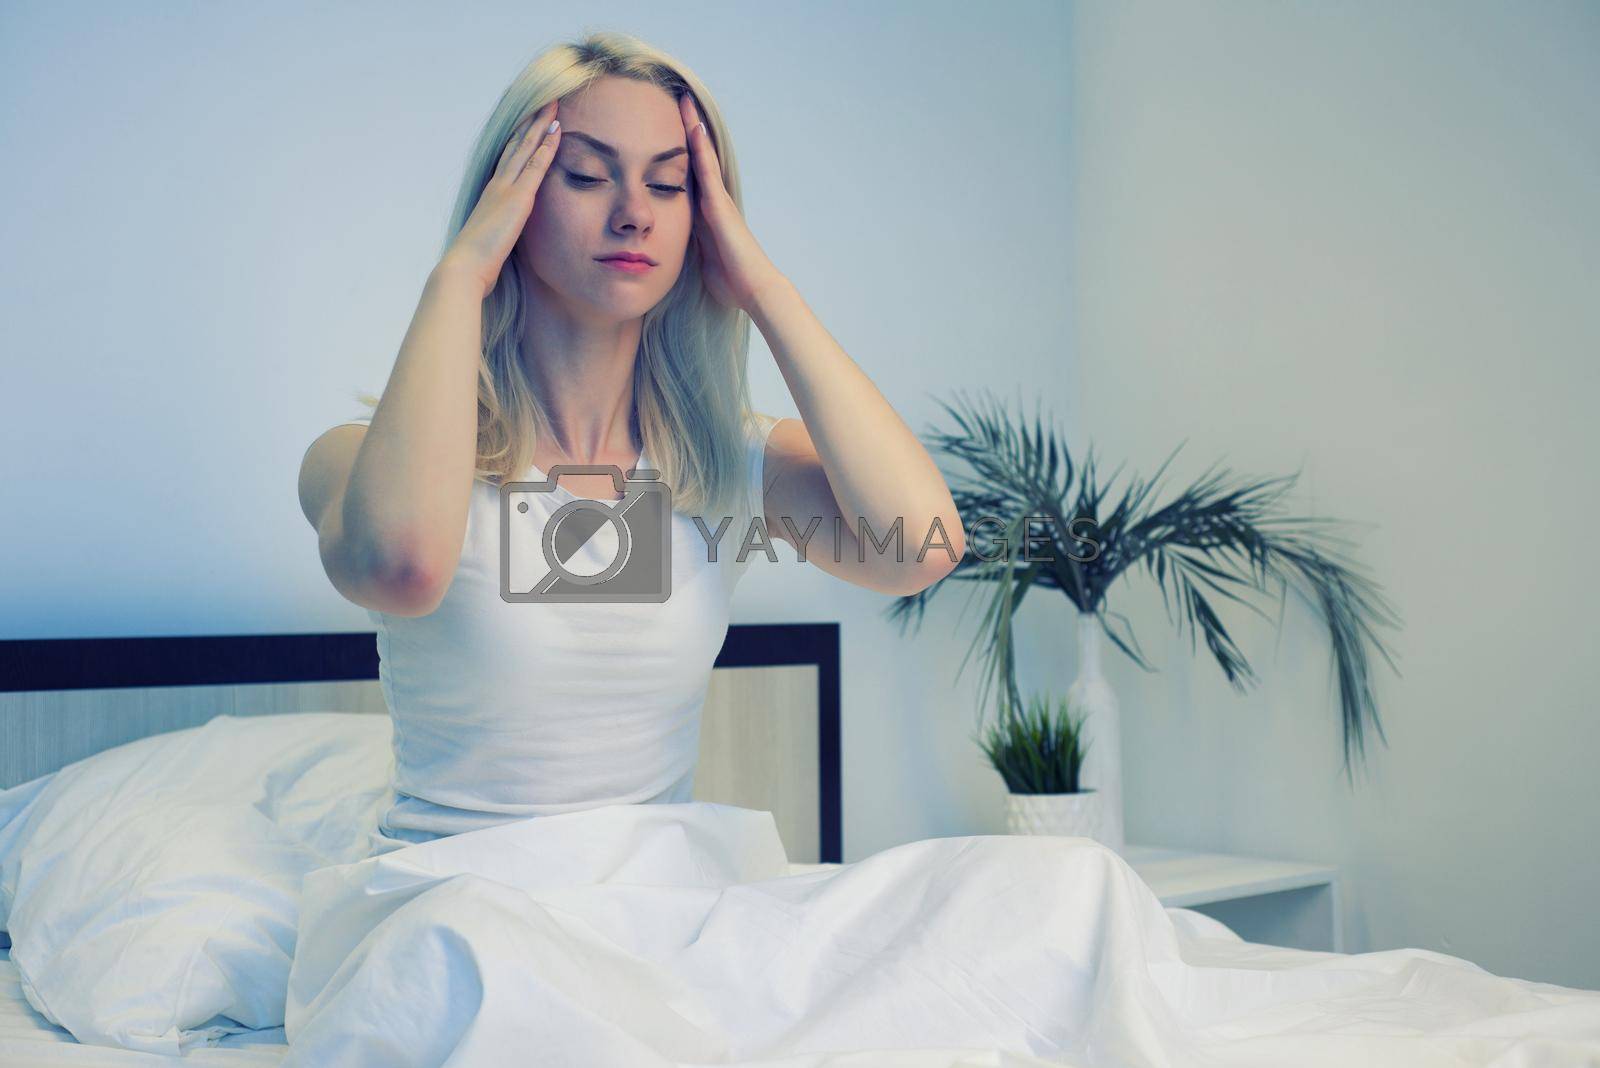 Royalty free image of Depressed woman awake in the night, she is exhausted and suffering from insomnia by zartarn